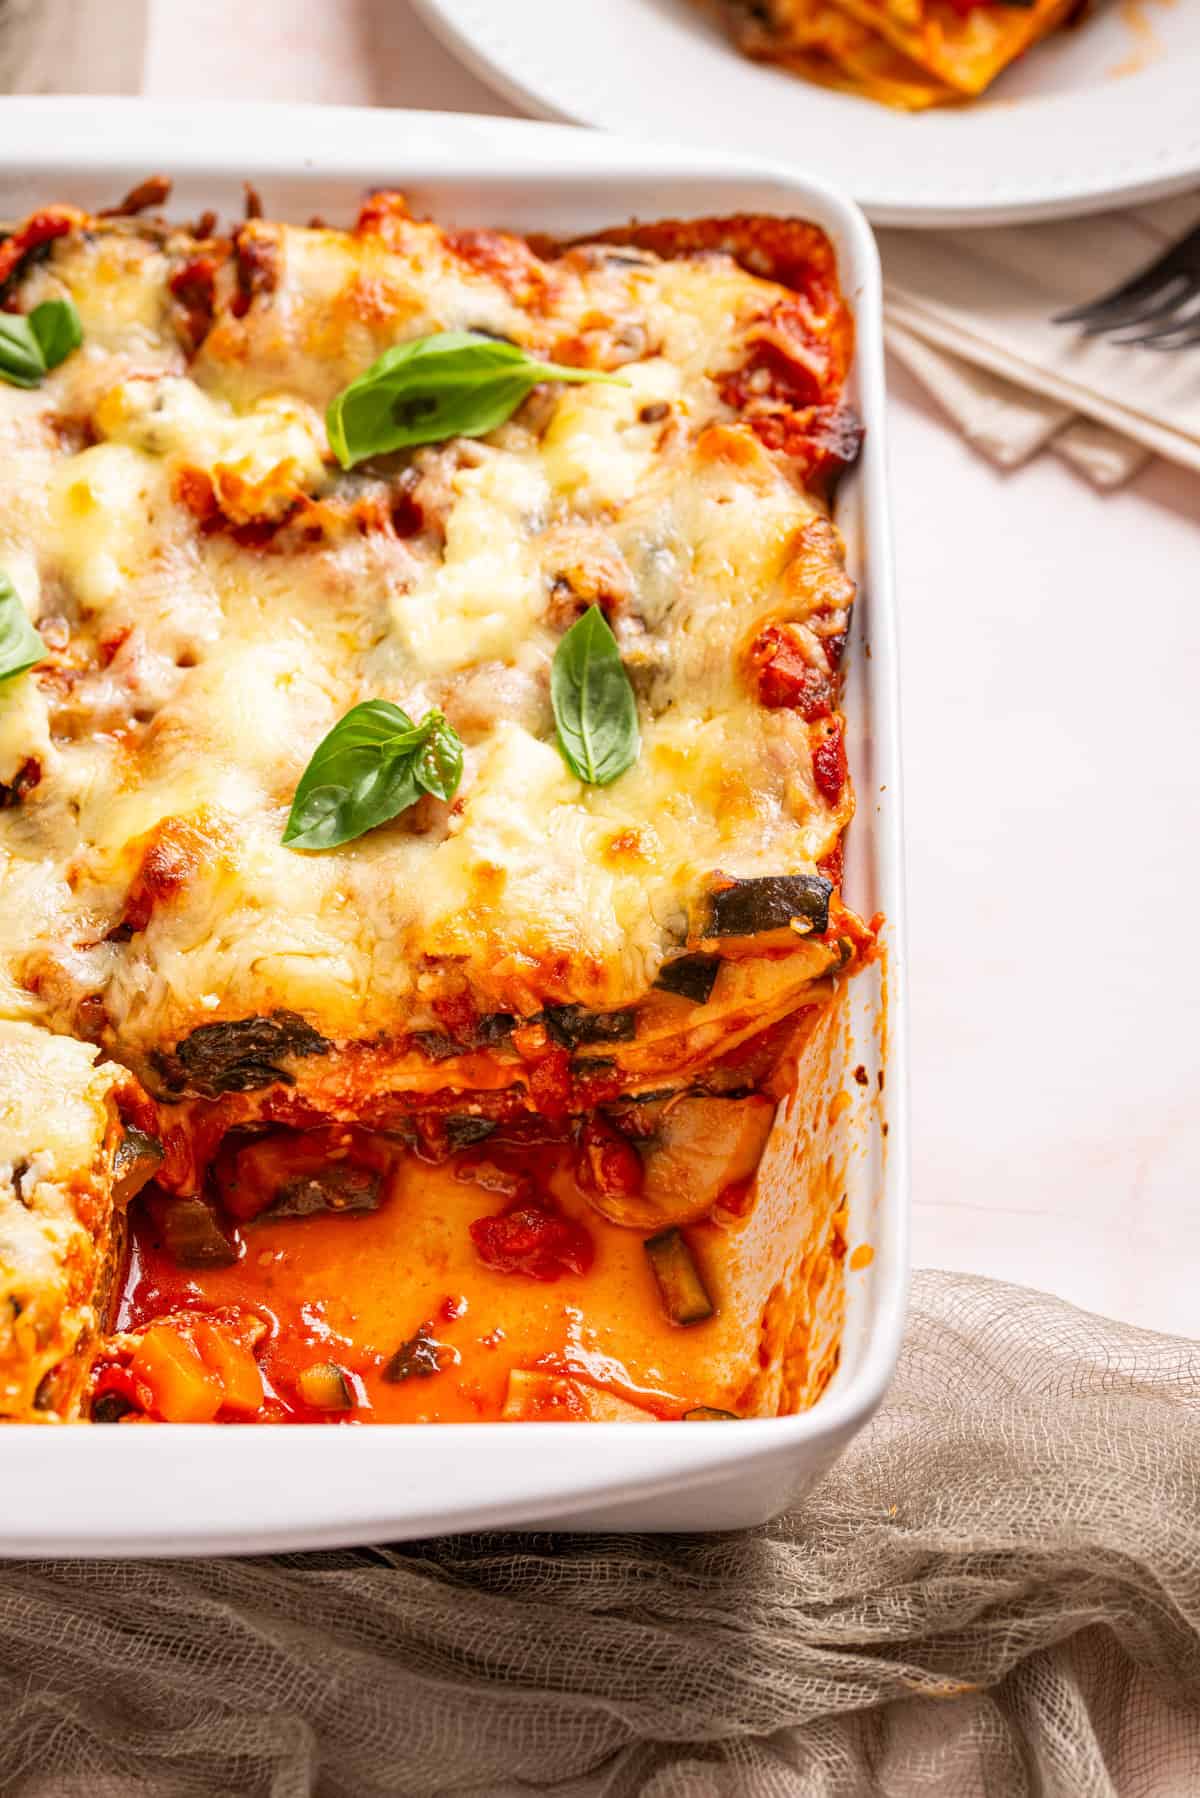 A close up image of baked vegetable lasagna with one slice taken out of the baking dish.